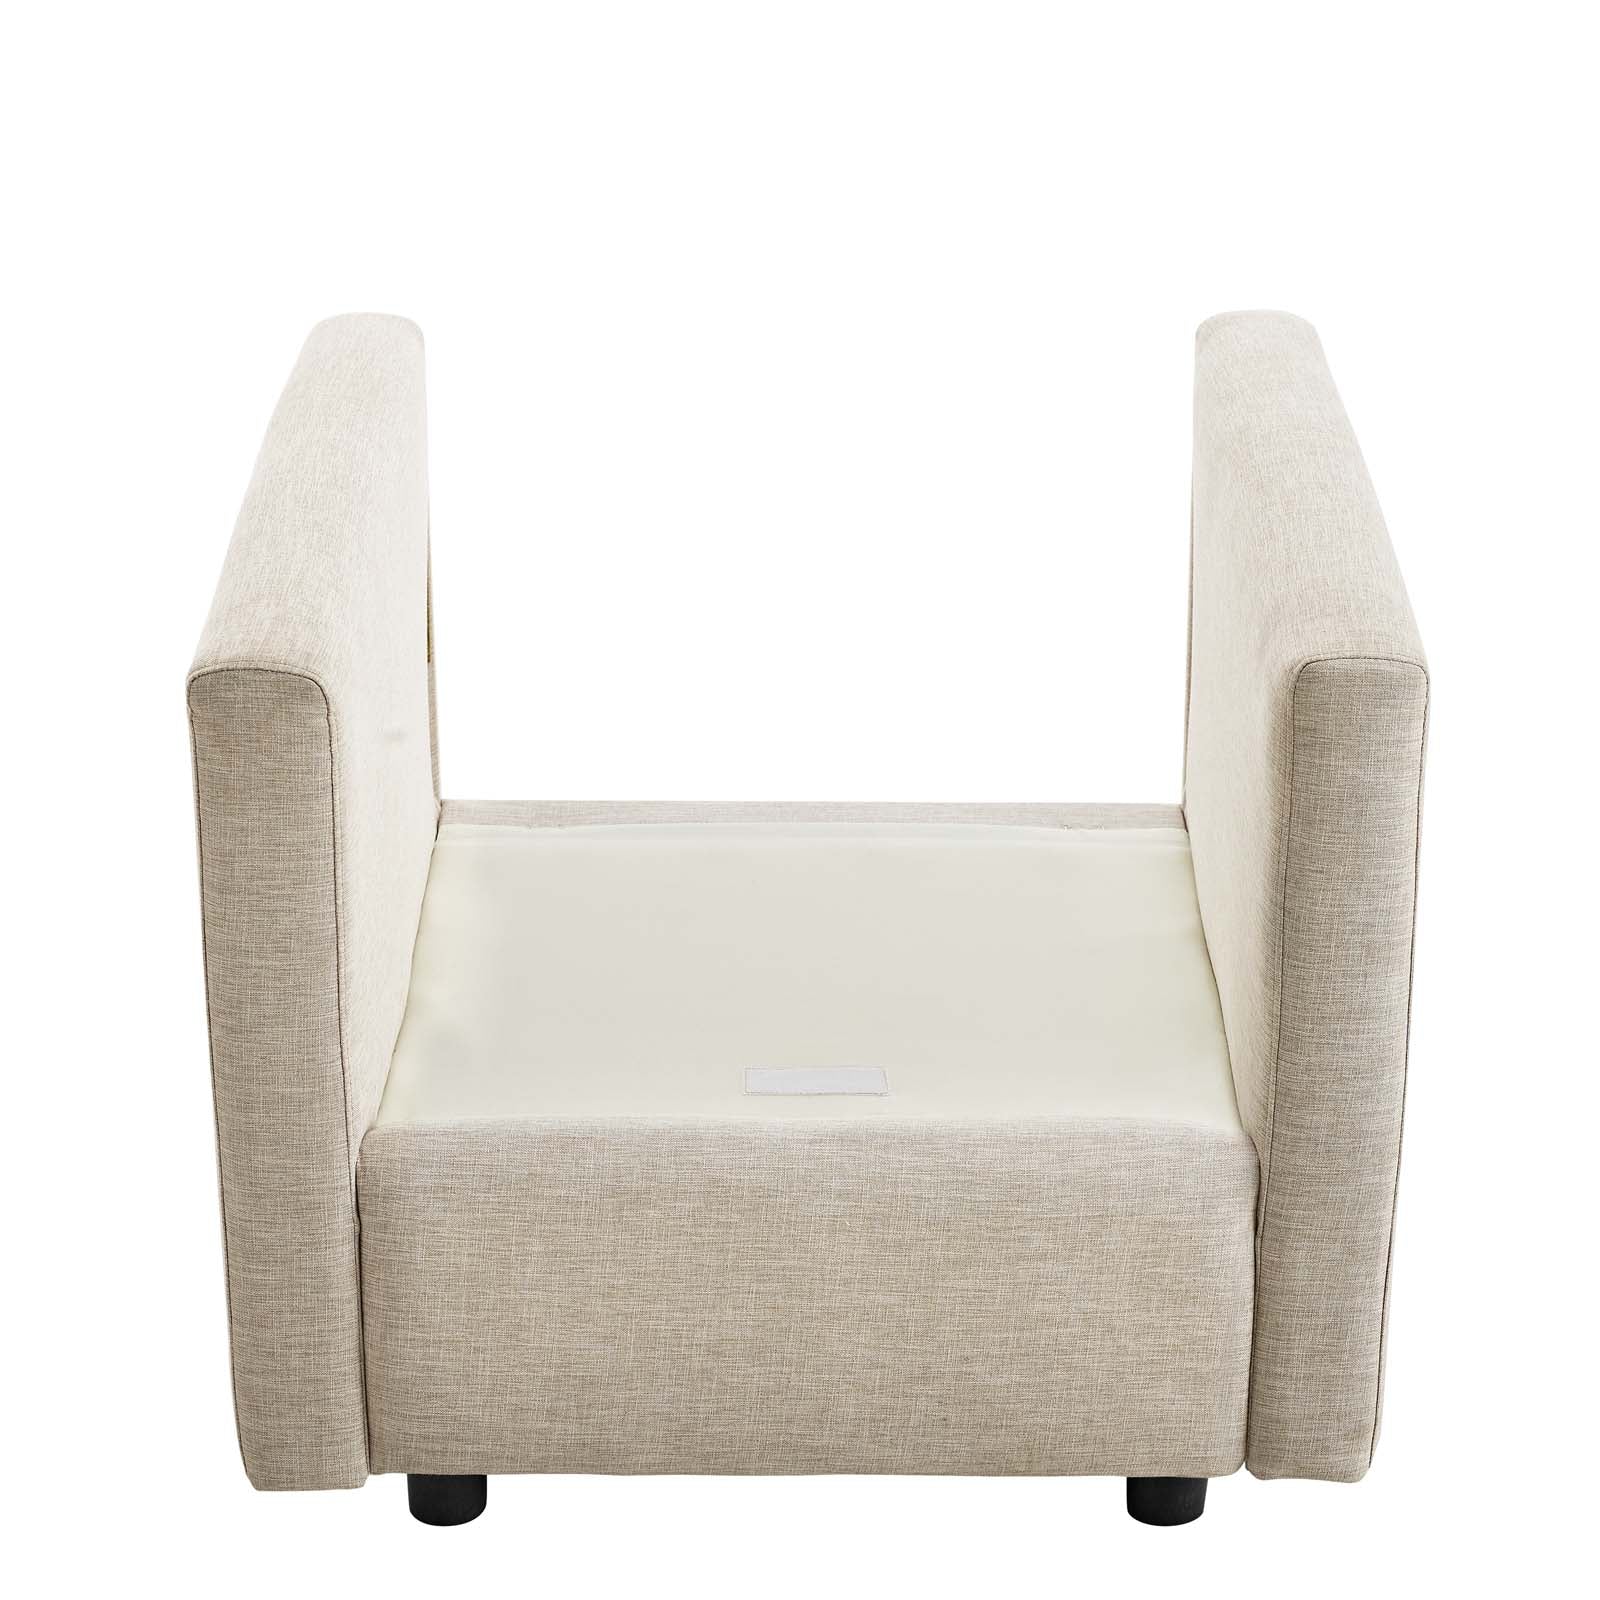 Modway Chairs - Activate Upholstered Fabric Armchair Beige